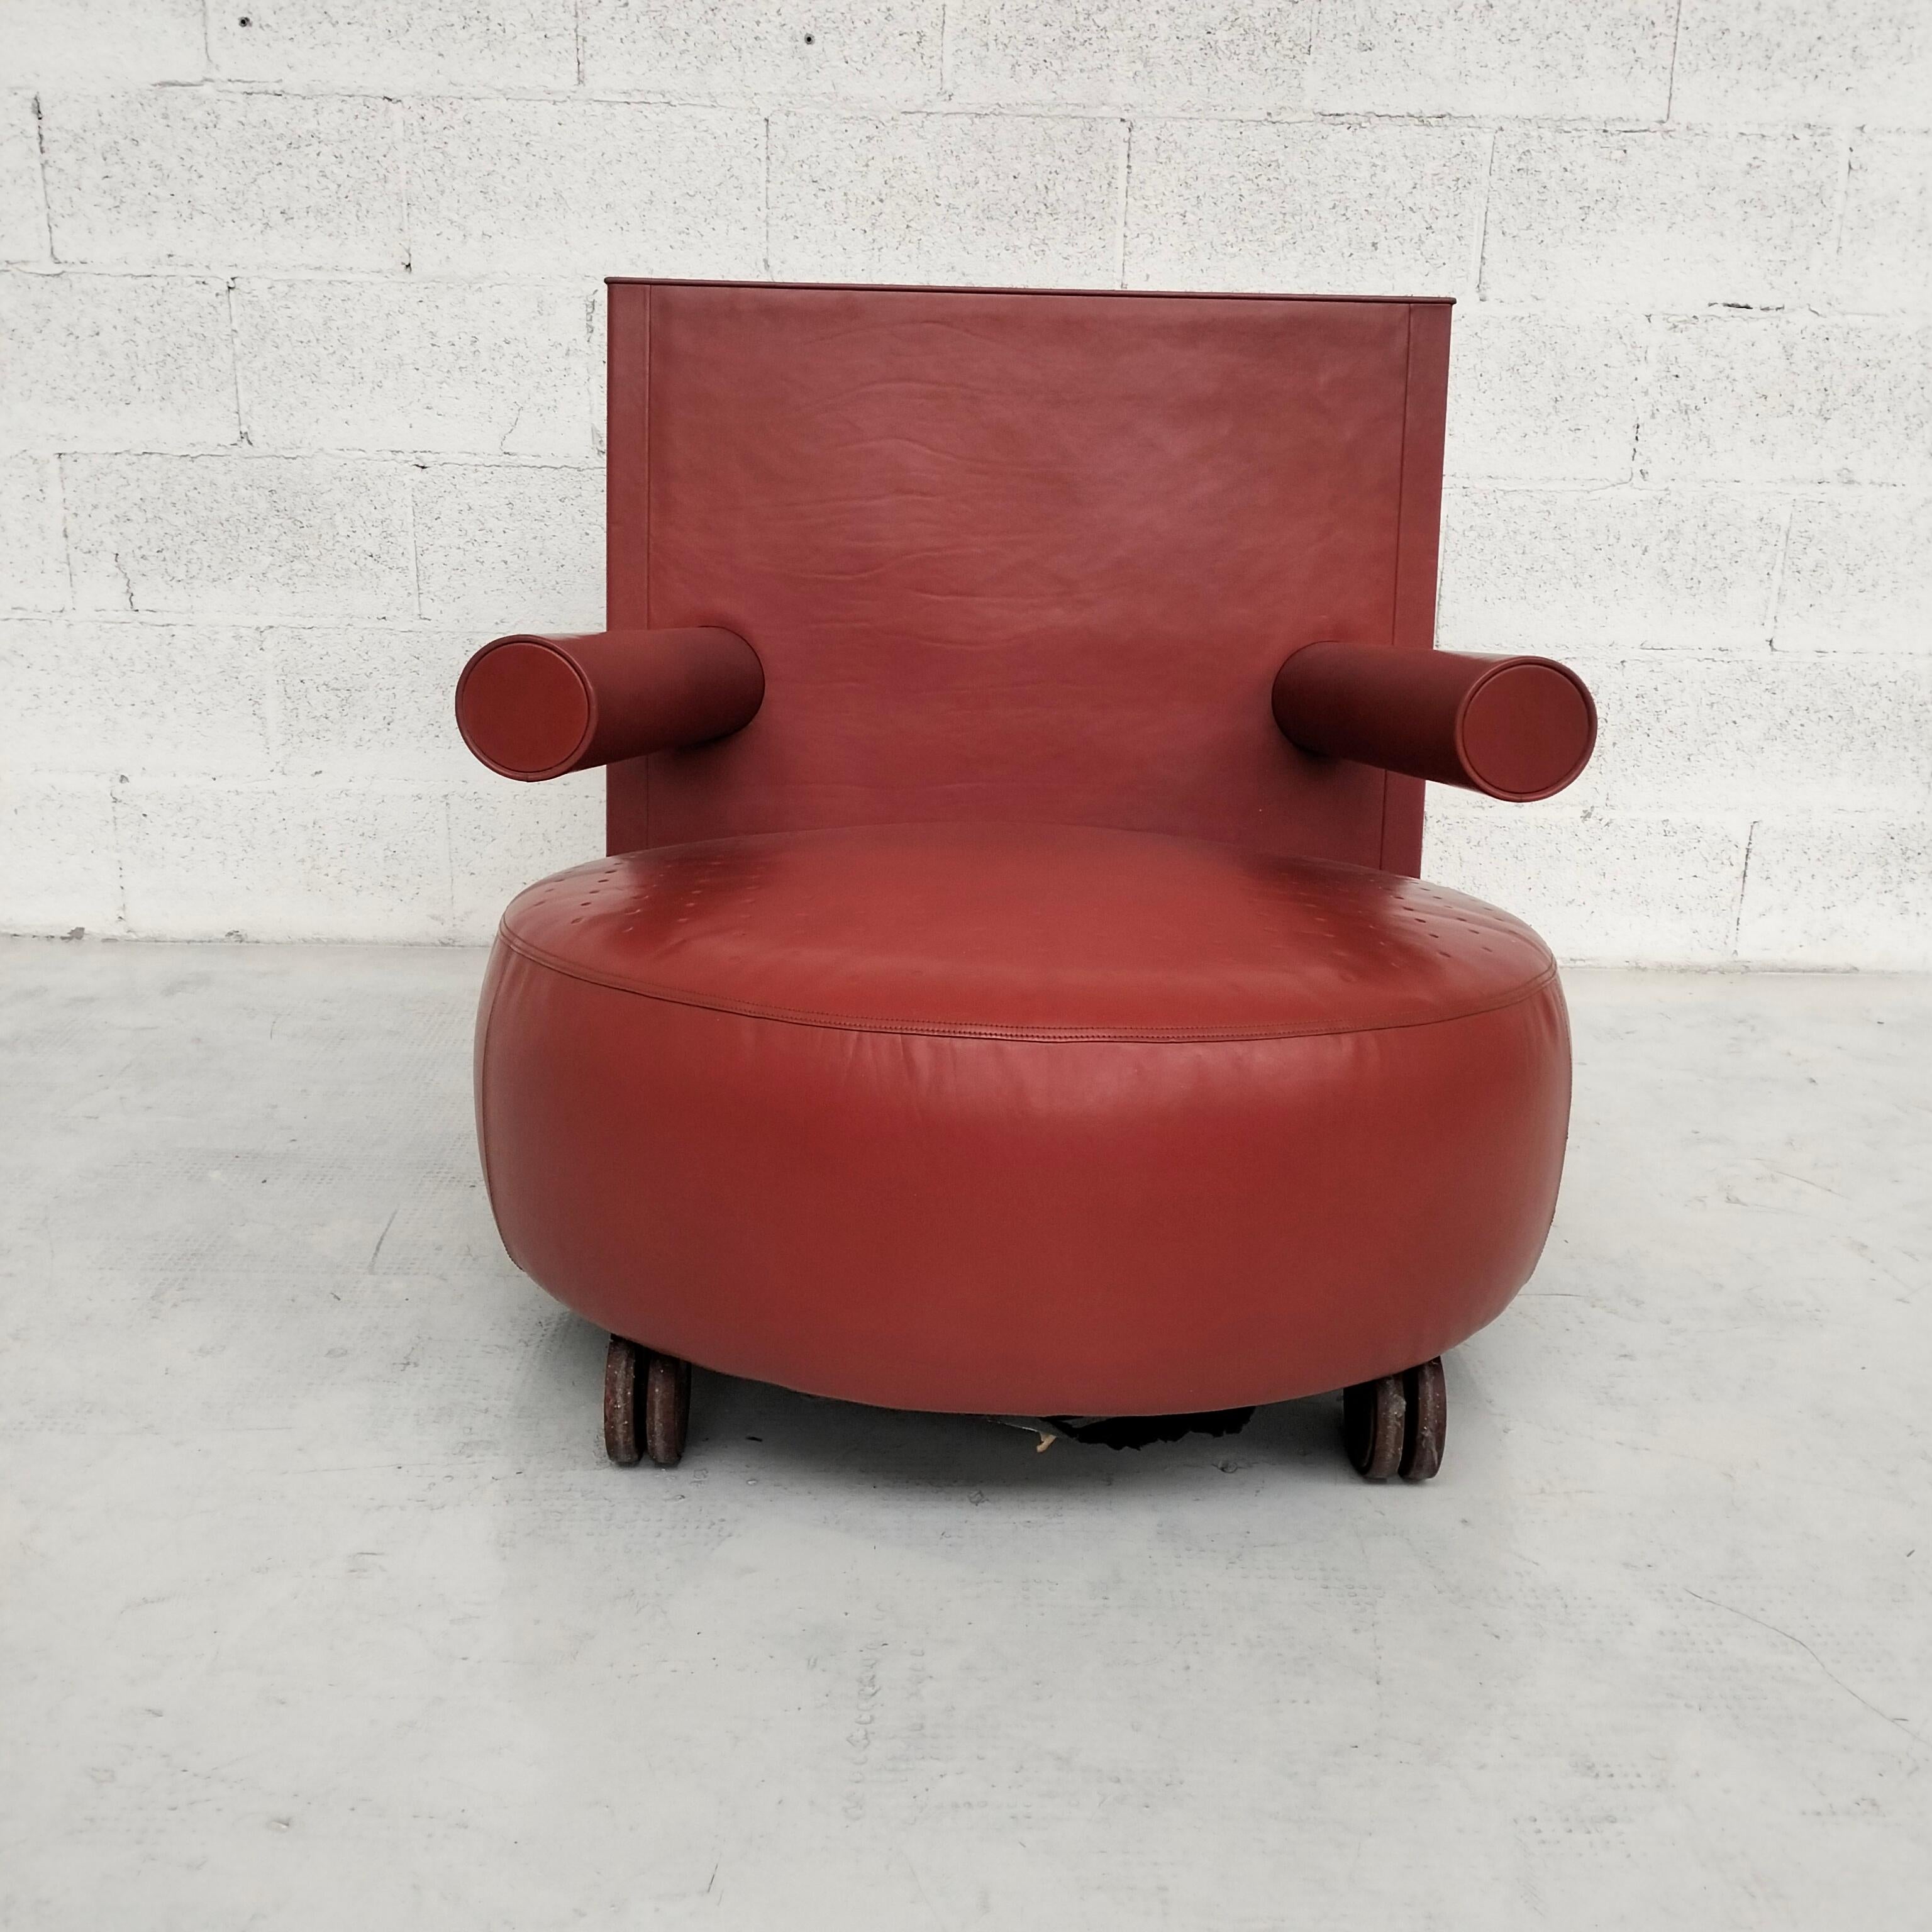 Late 20th Century Baisity leather armchair by Antonio Citterio for B&B Italia - 1980’s For Sale